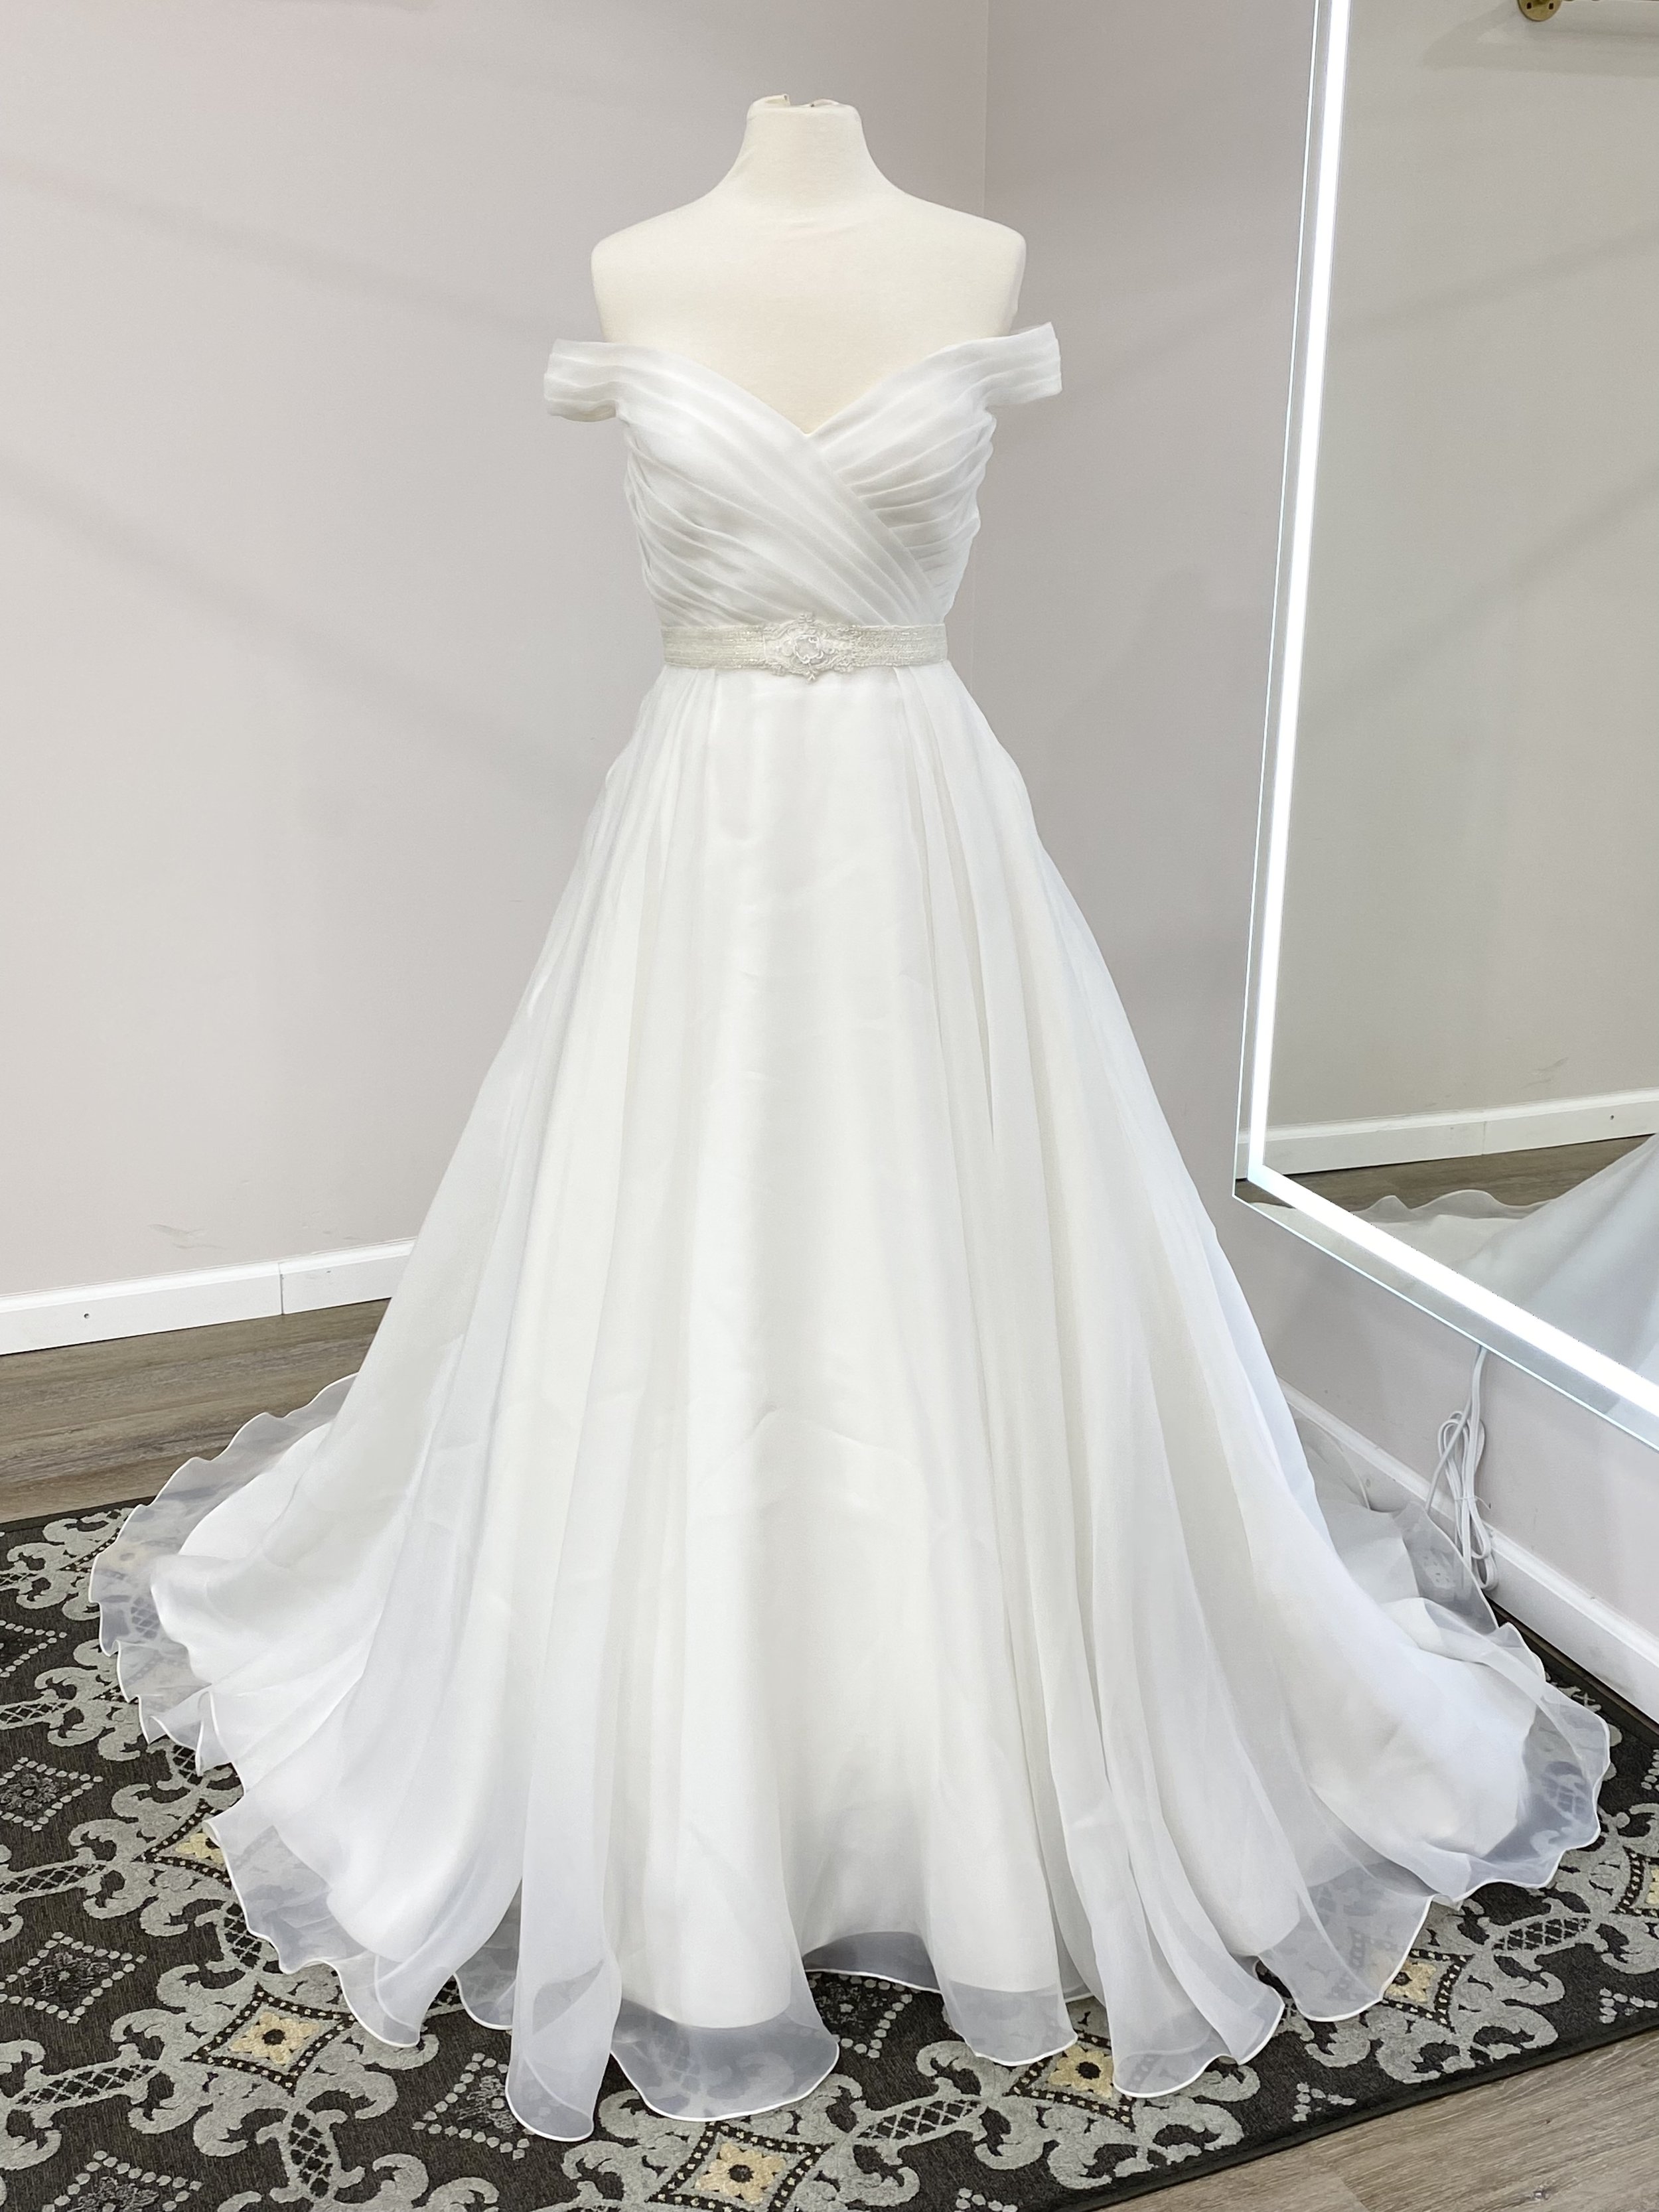 Where Can You Buy Beautiful Gowns Online in India? - Wish N Wed